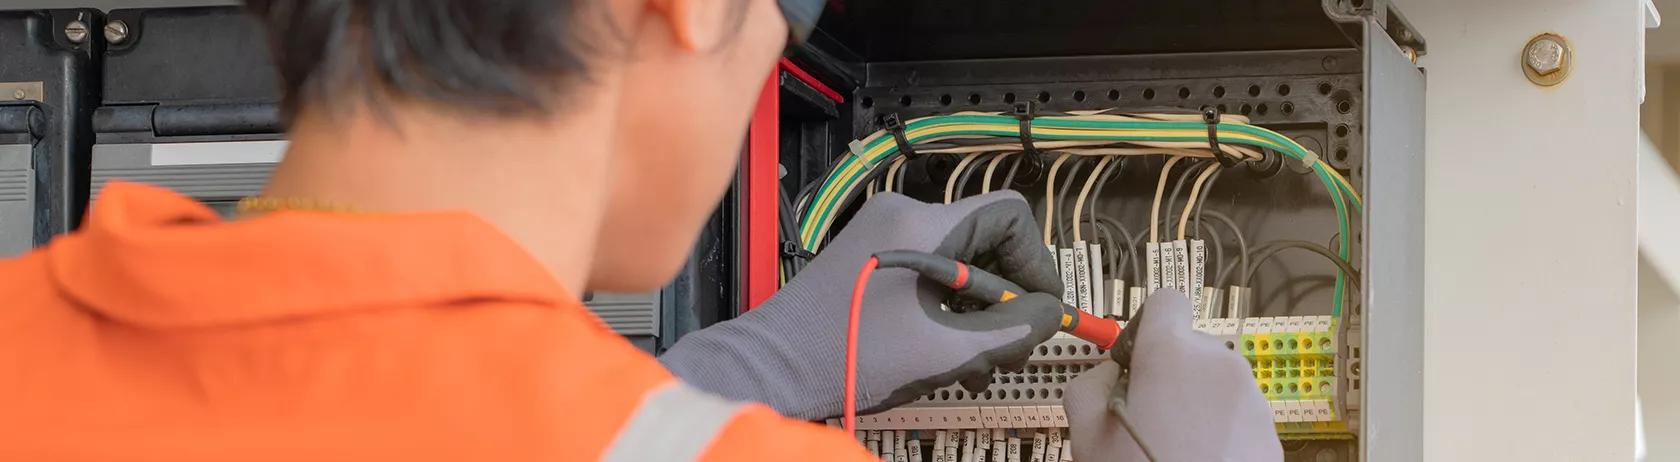 Electrical technician examining a cable junction box using zip tie cable management